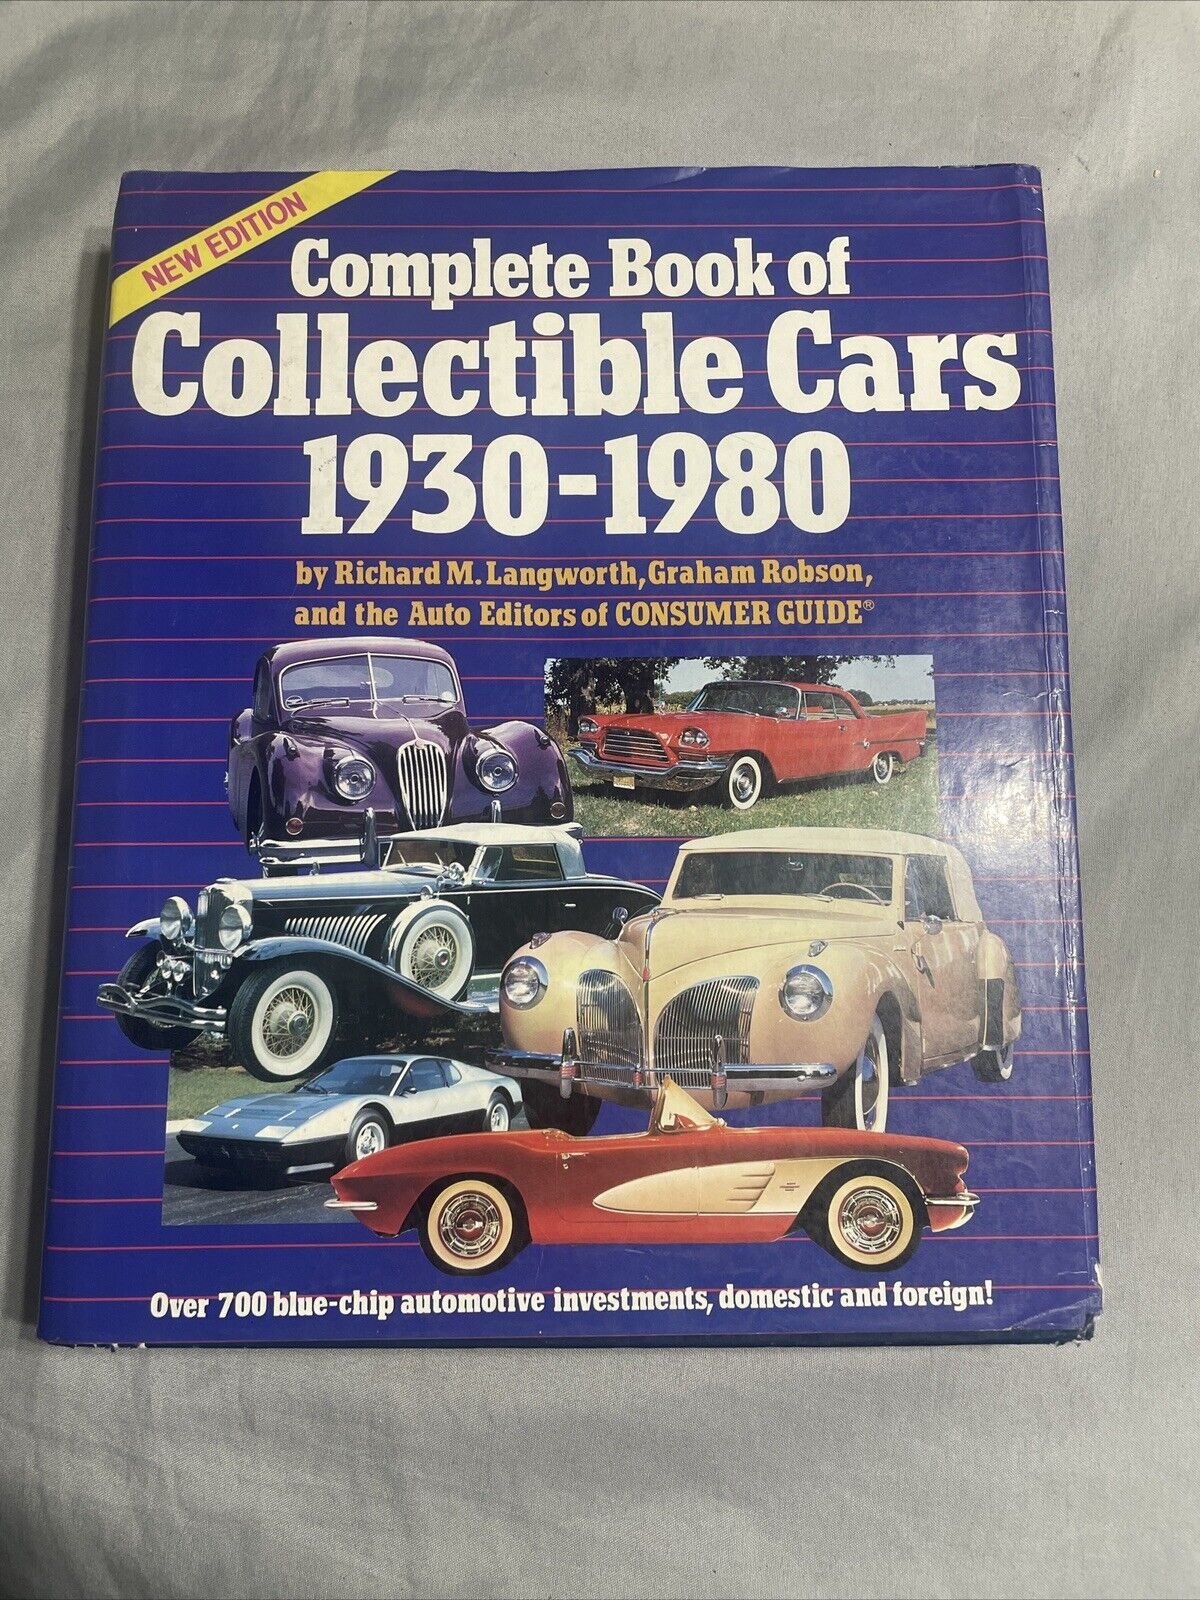 Cars Complete Book Of 1930-1980 Hardcover With Dust Jacket Collectible